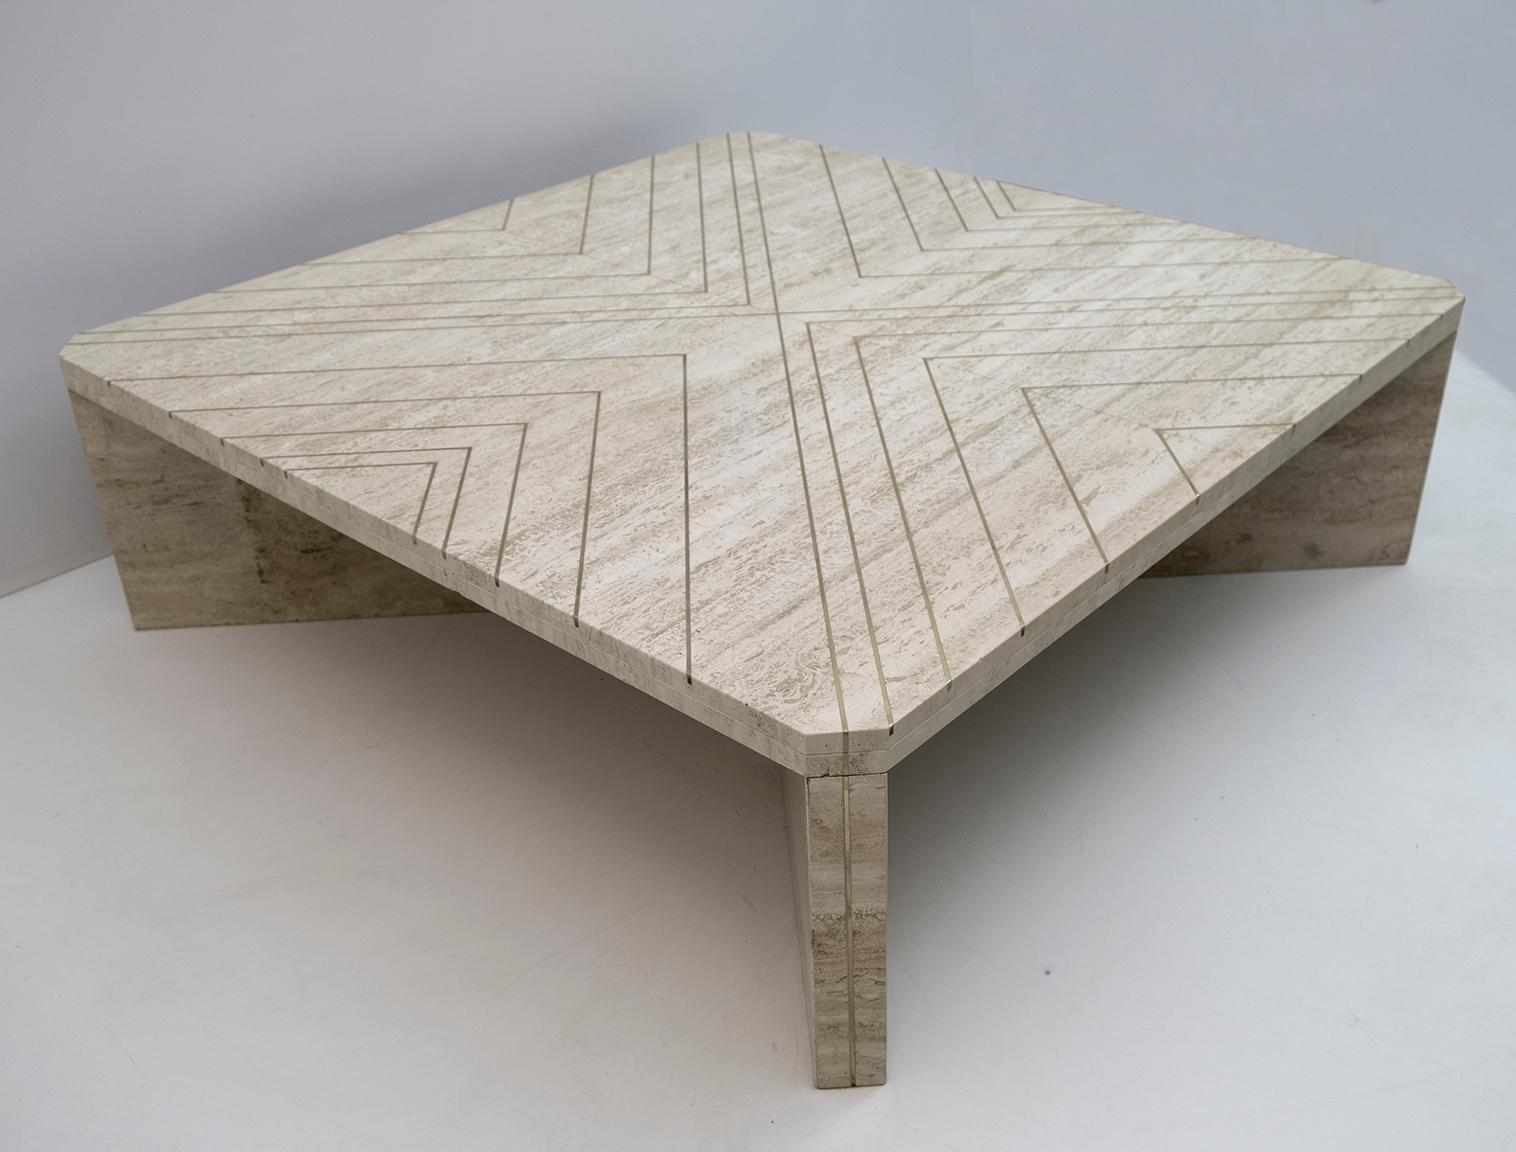 Rare and absolutely fantastic coffee table by Willy Rizzo. The table has a fantastic solid brass arrow pattern built into the travertine. The inlay also runs in the base of the legs.
The top has a thickness of 4 cm.